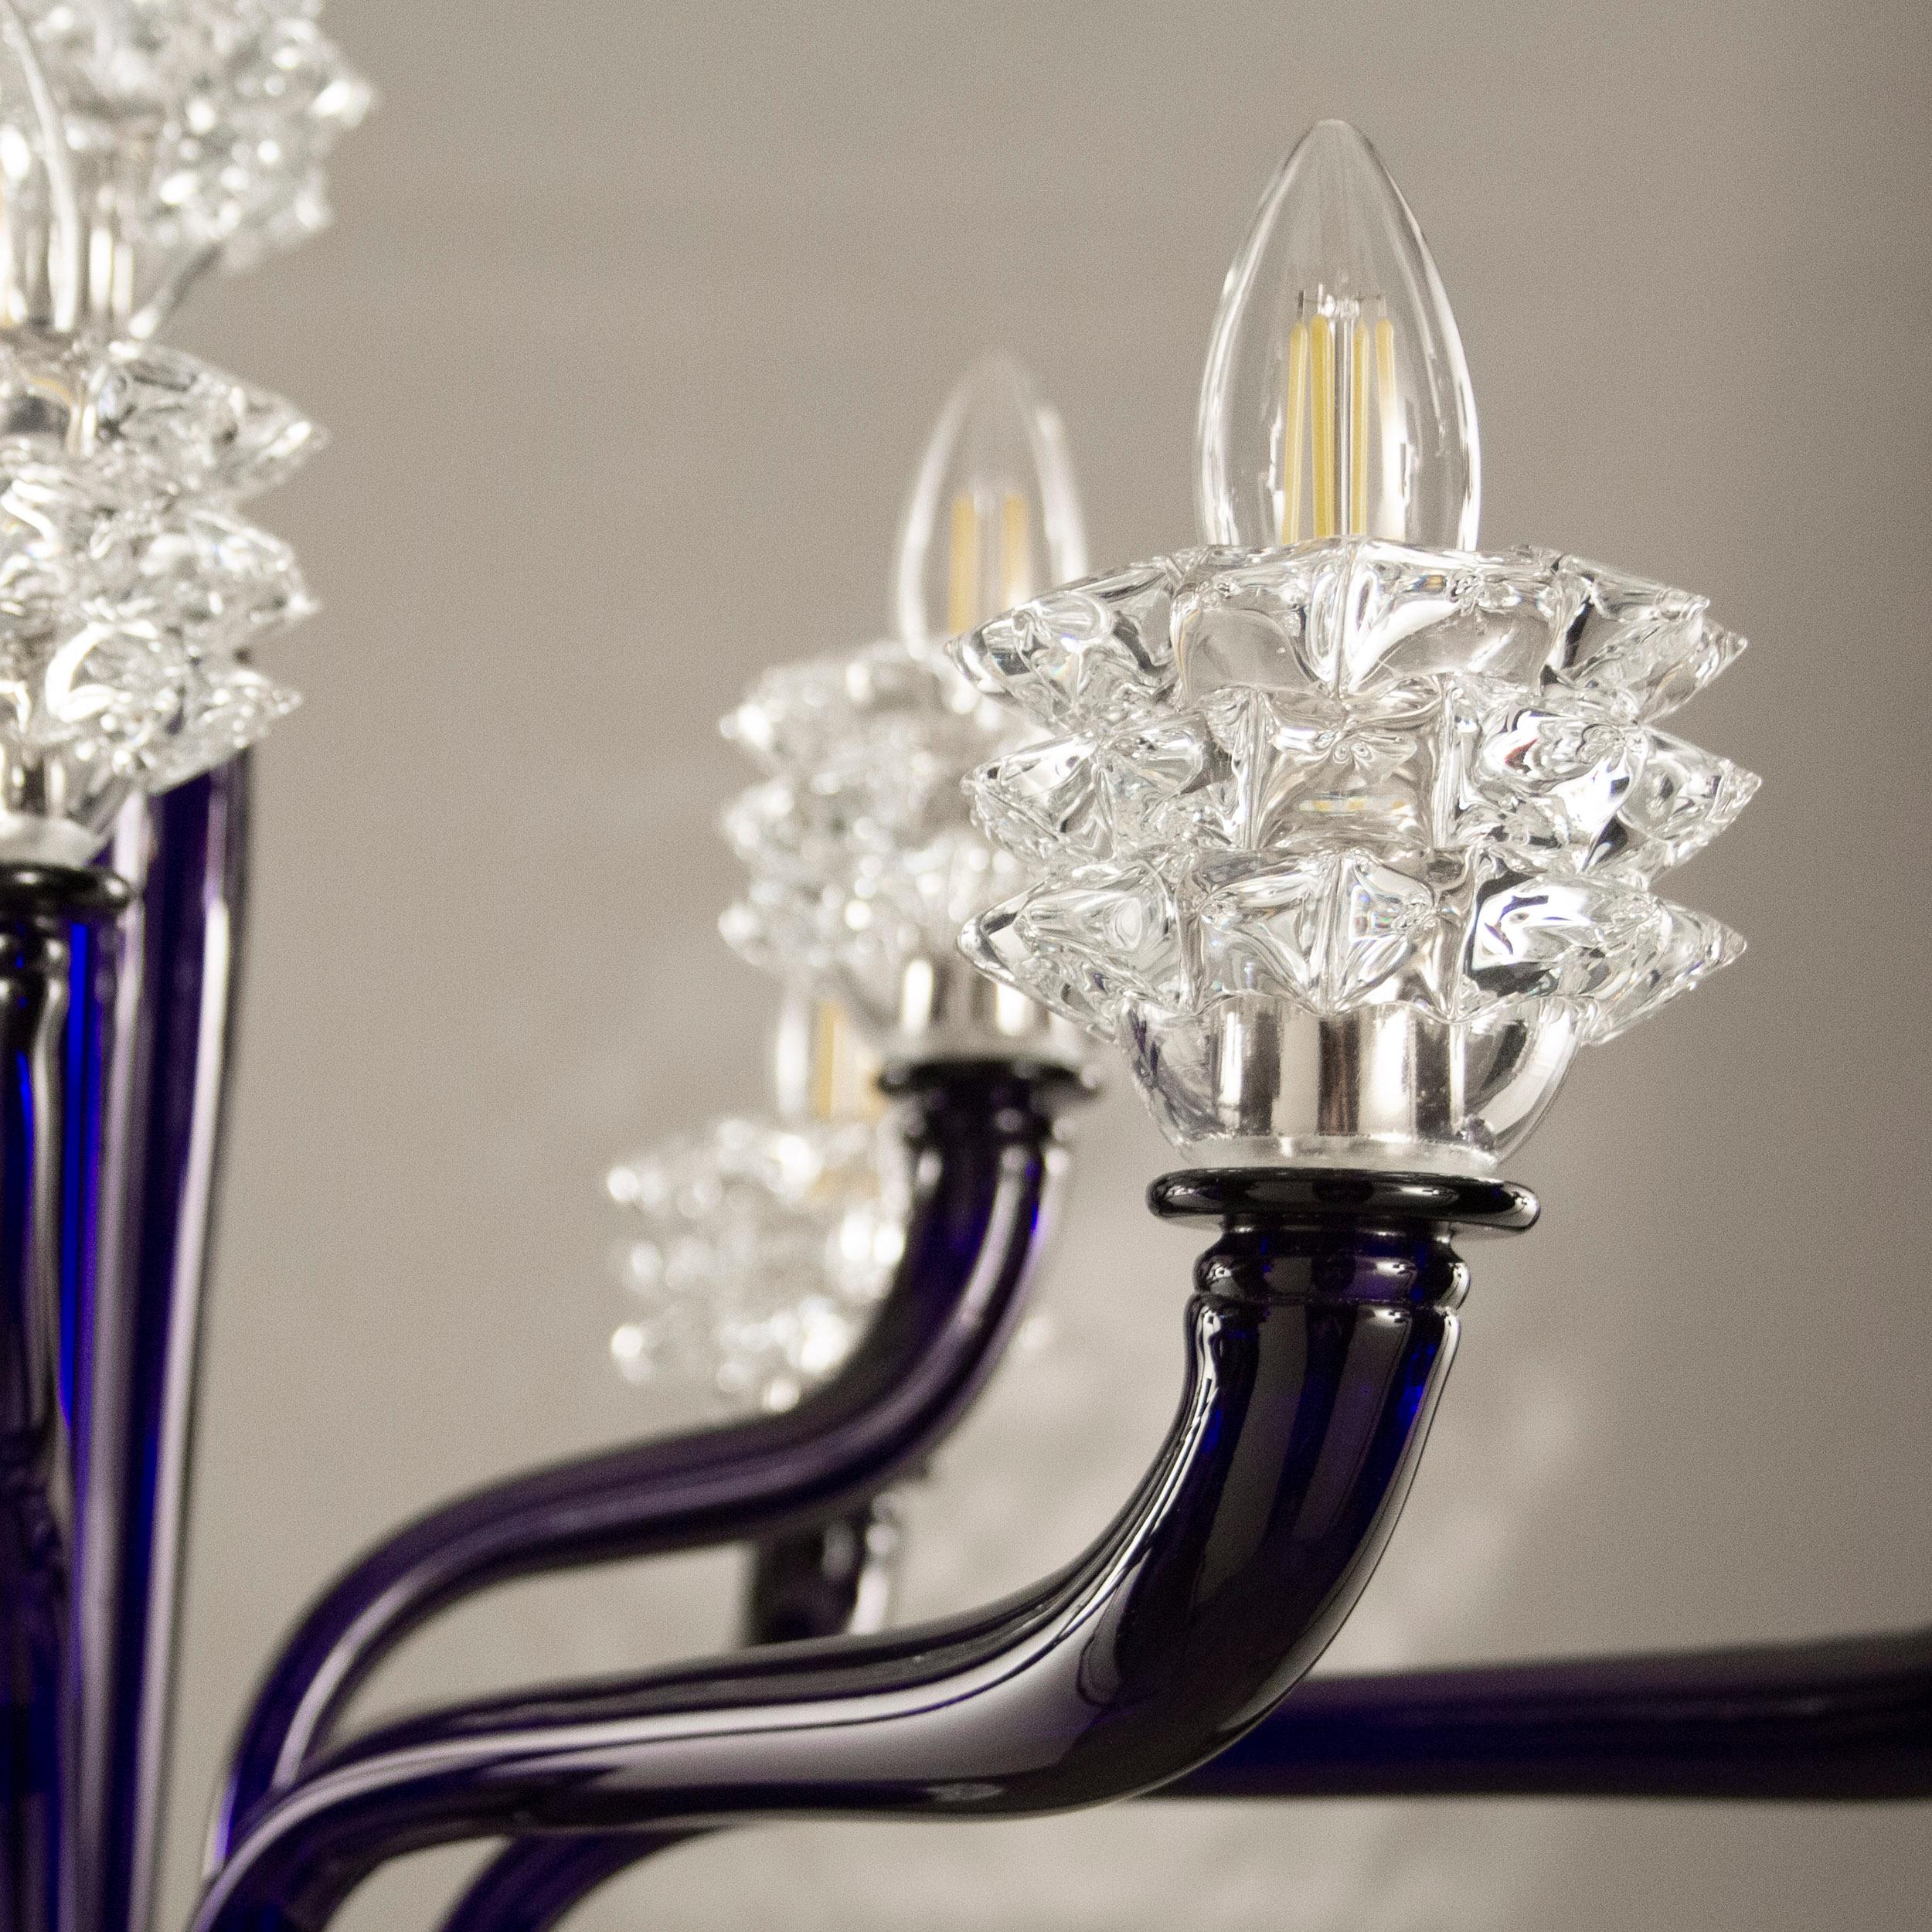 The diamante blown glass chandeliers are characterized by a slender central element.
The arms, central column and final cup are made of flawless smooth glass. The standout elements of this chandelier are the cups, which are created using a complex